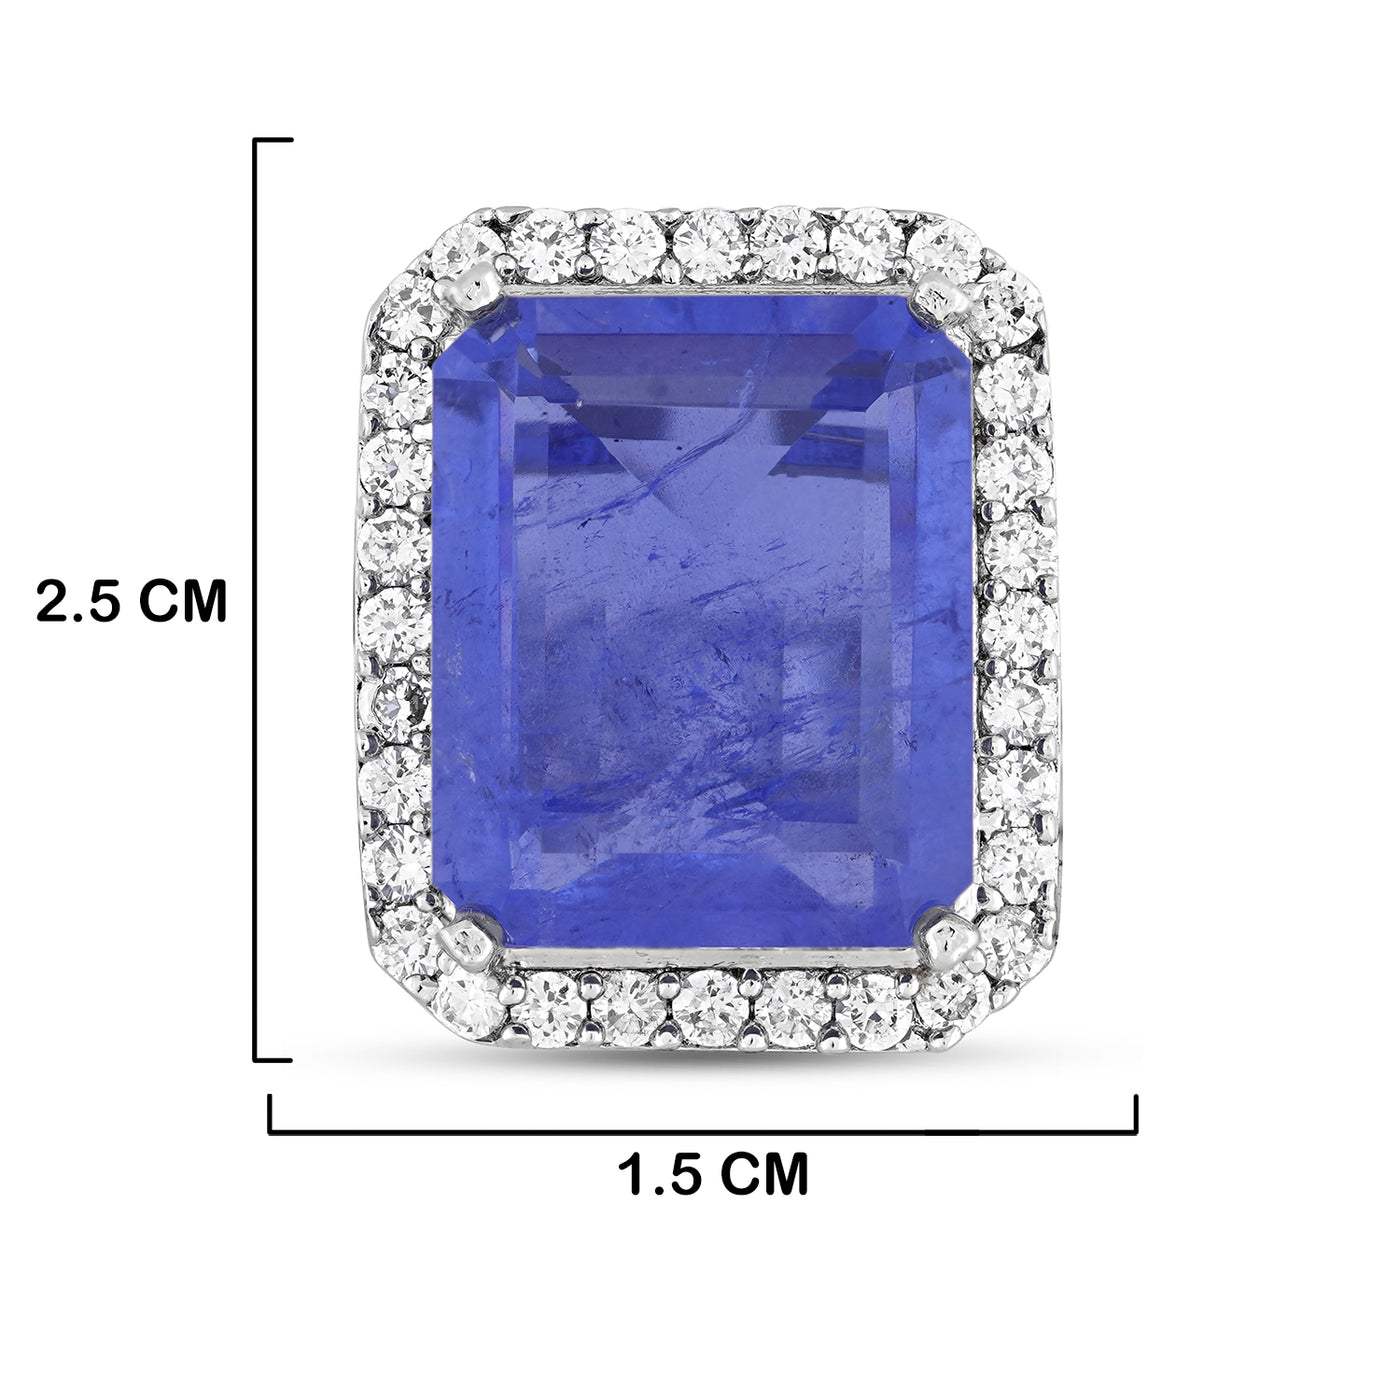 Purple Stone Cubic Zirconia Ring with measurements in cm. 2.5cm by 1.5cm.